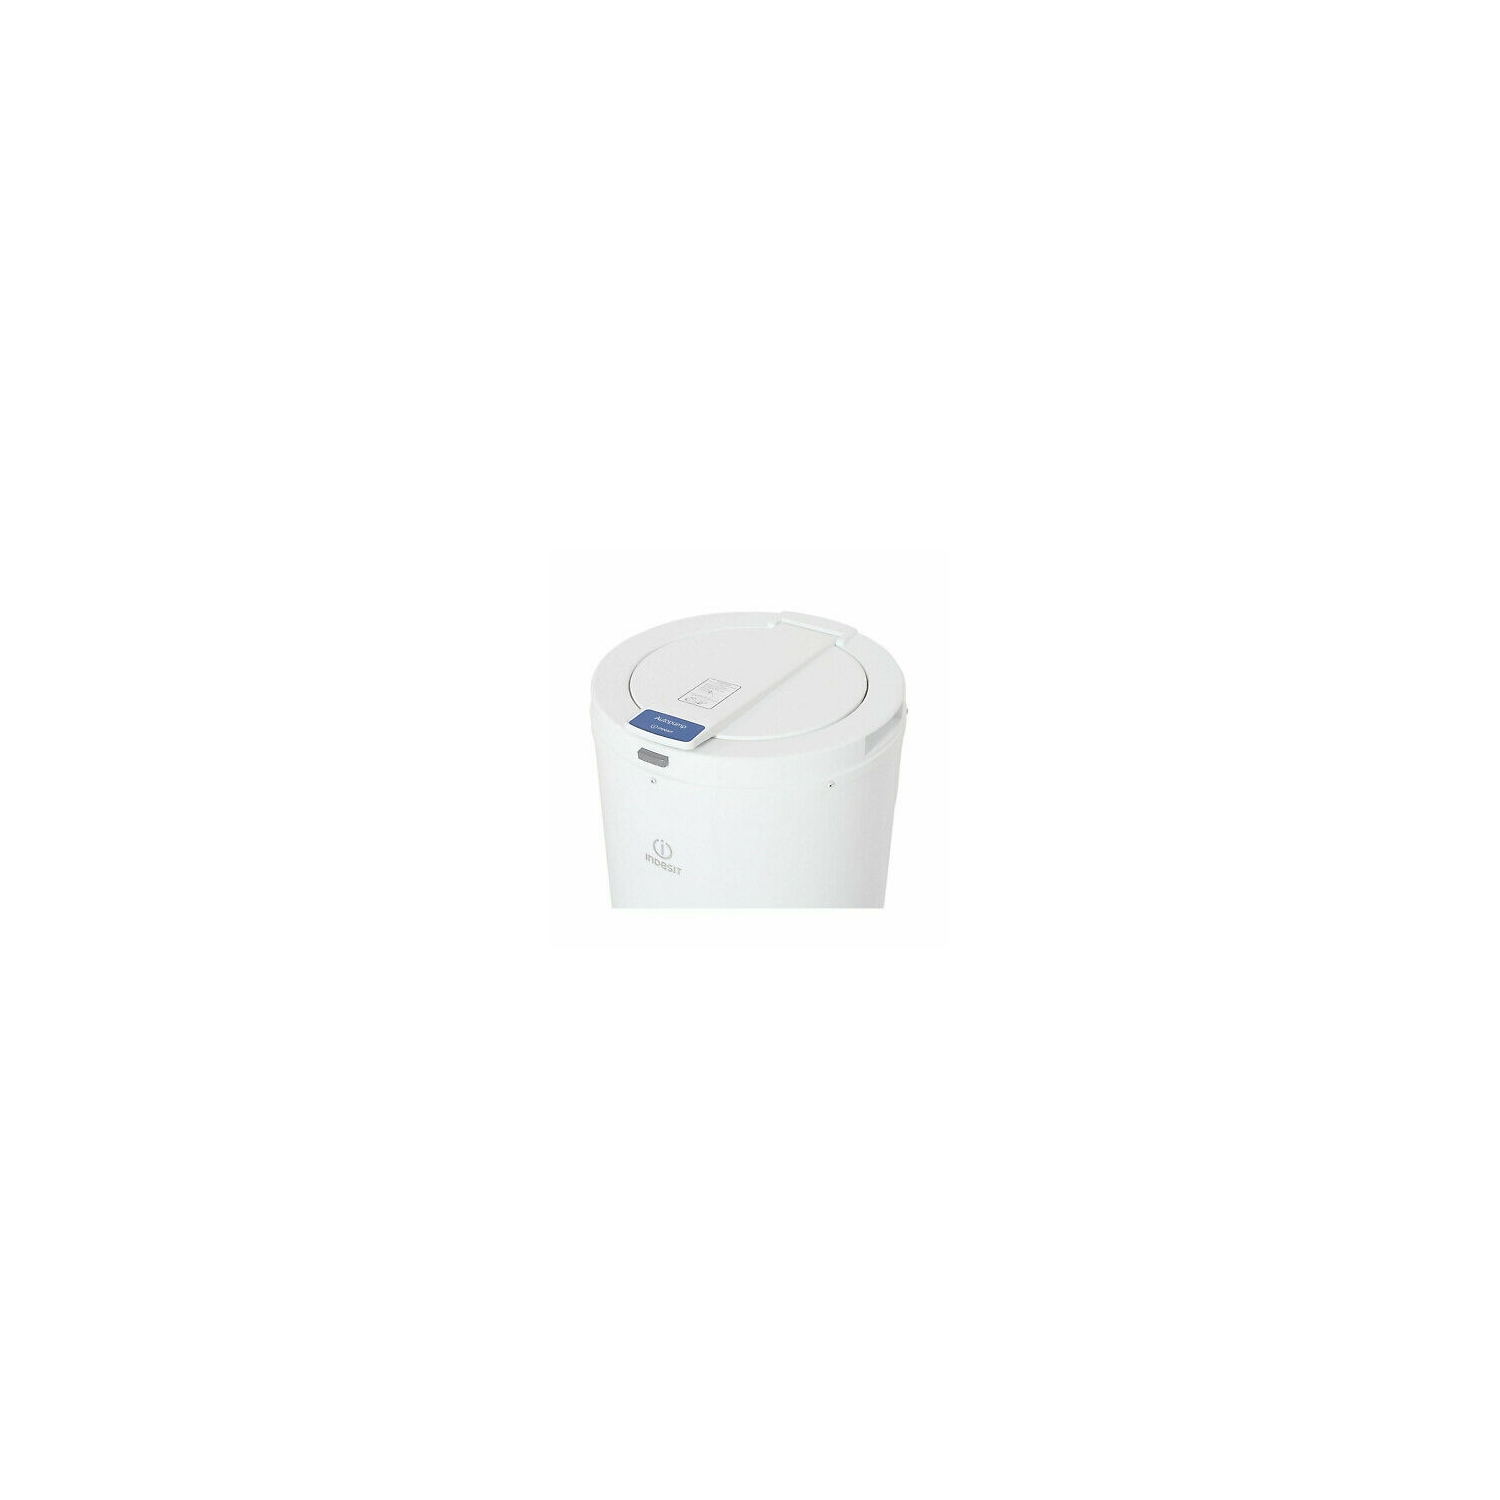 Indesit 4kg Freestanding Spin Dryer With Gravity Drain - White - 2